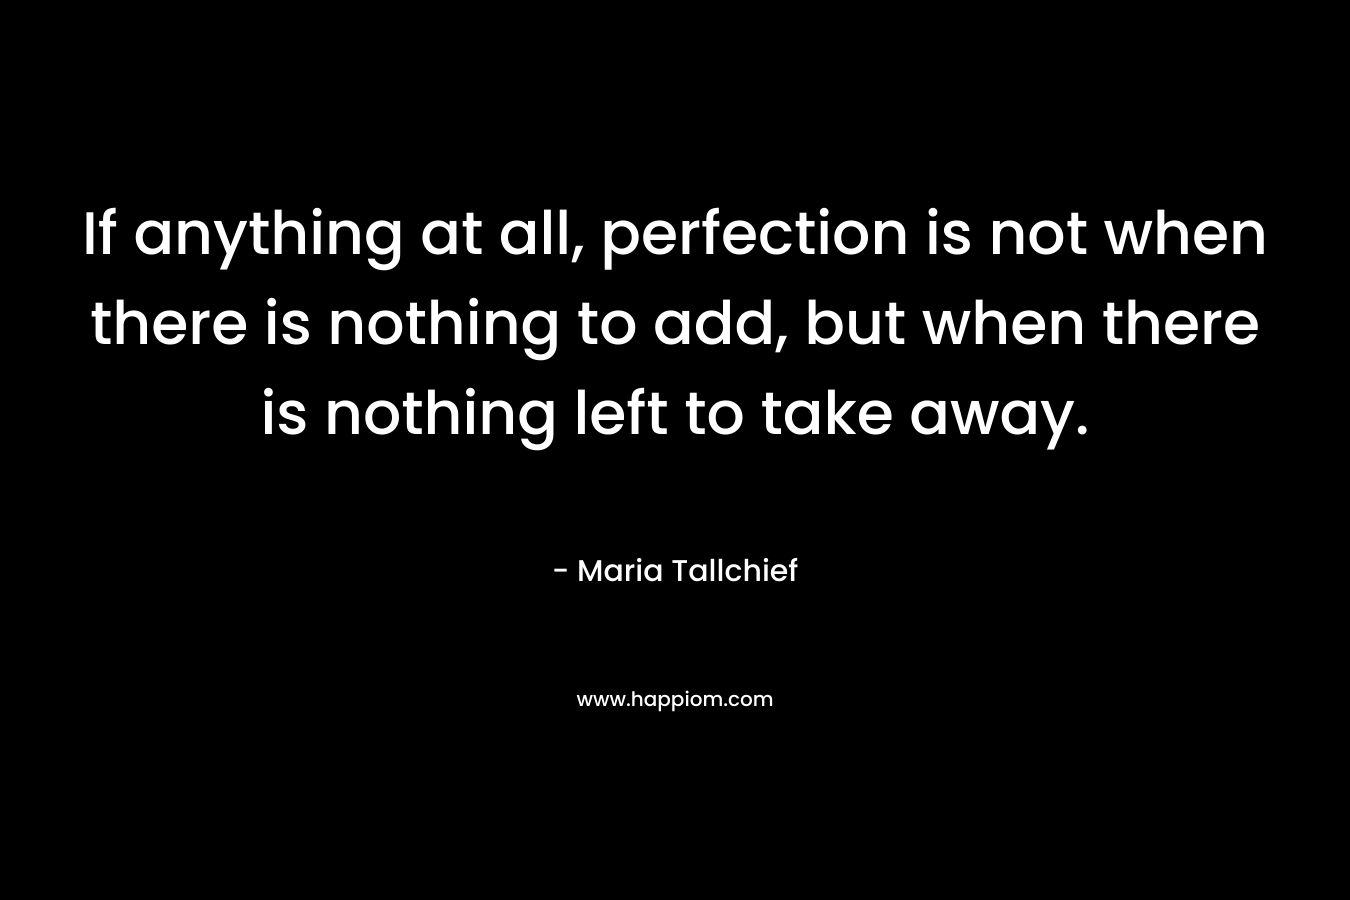 If anything at all, perfection is not when there is nothing to add, but when there is nothing left to take away.